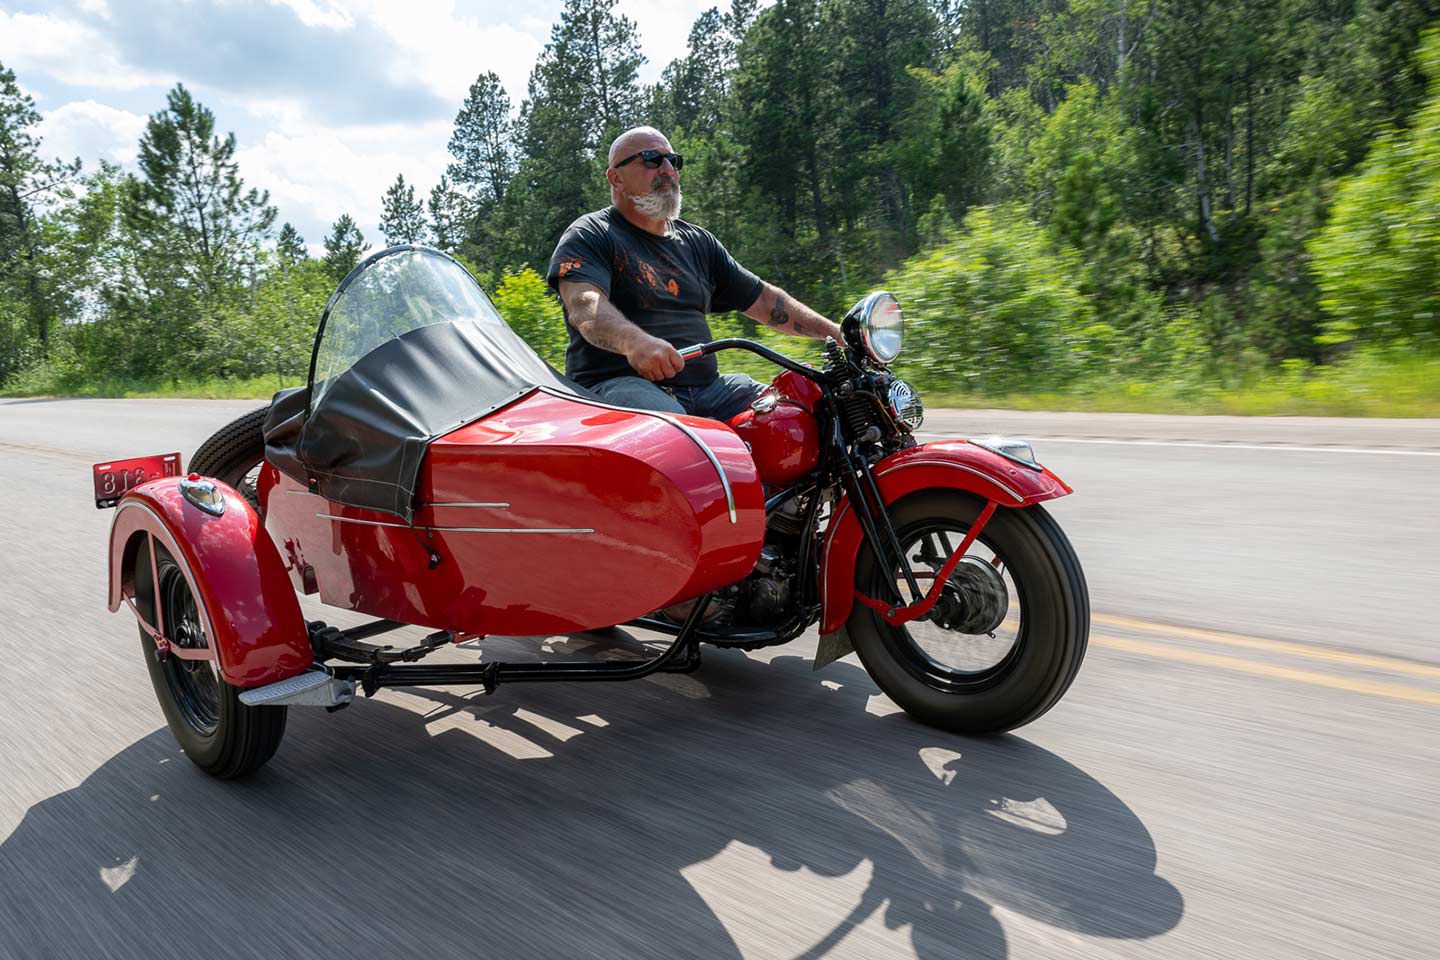 Scotty Busch (@scottybuschhd) riding Vanocker Canyon on his 1948 Panhead with sidecar.